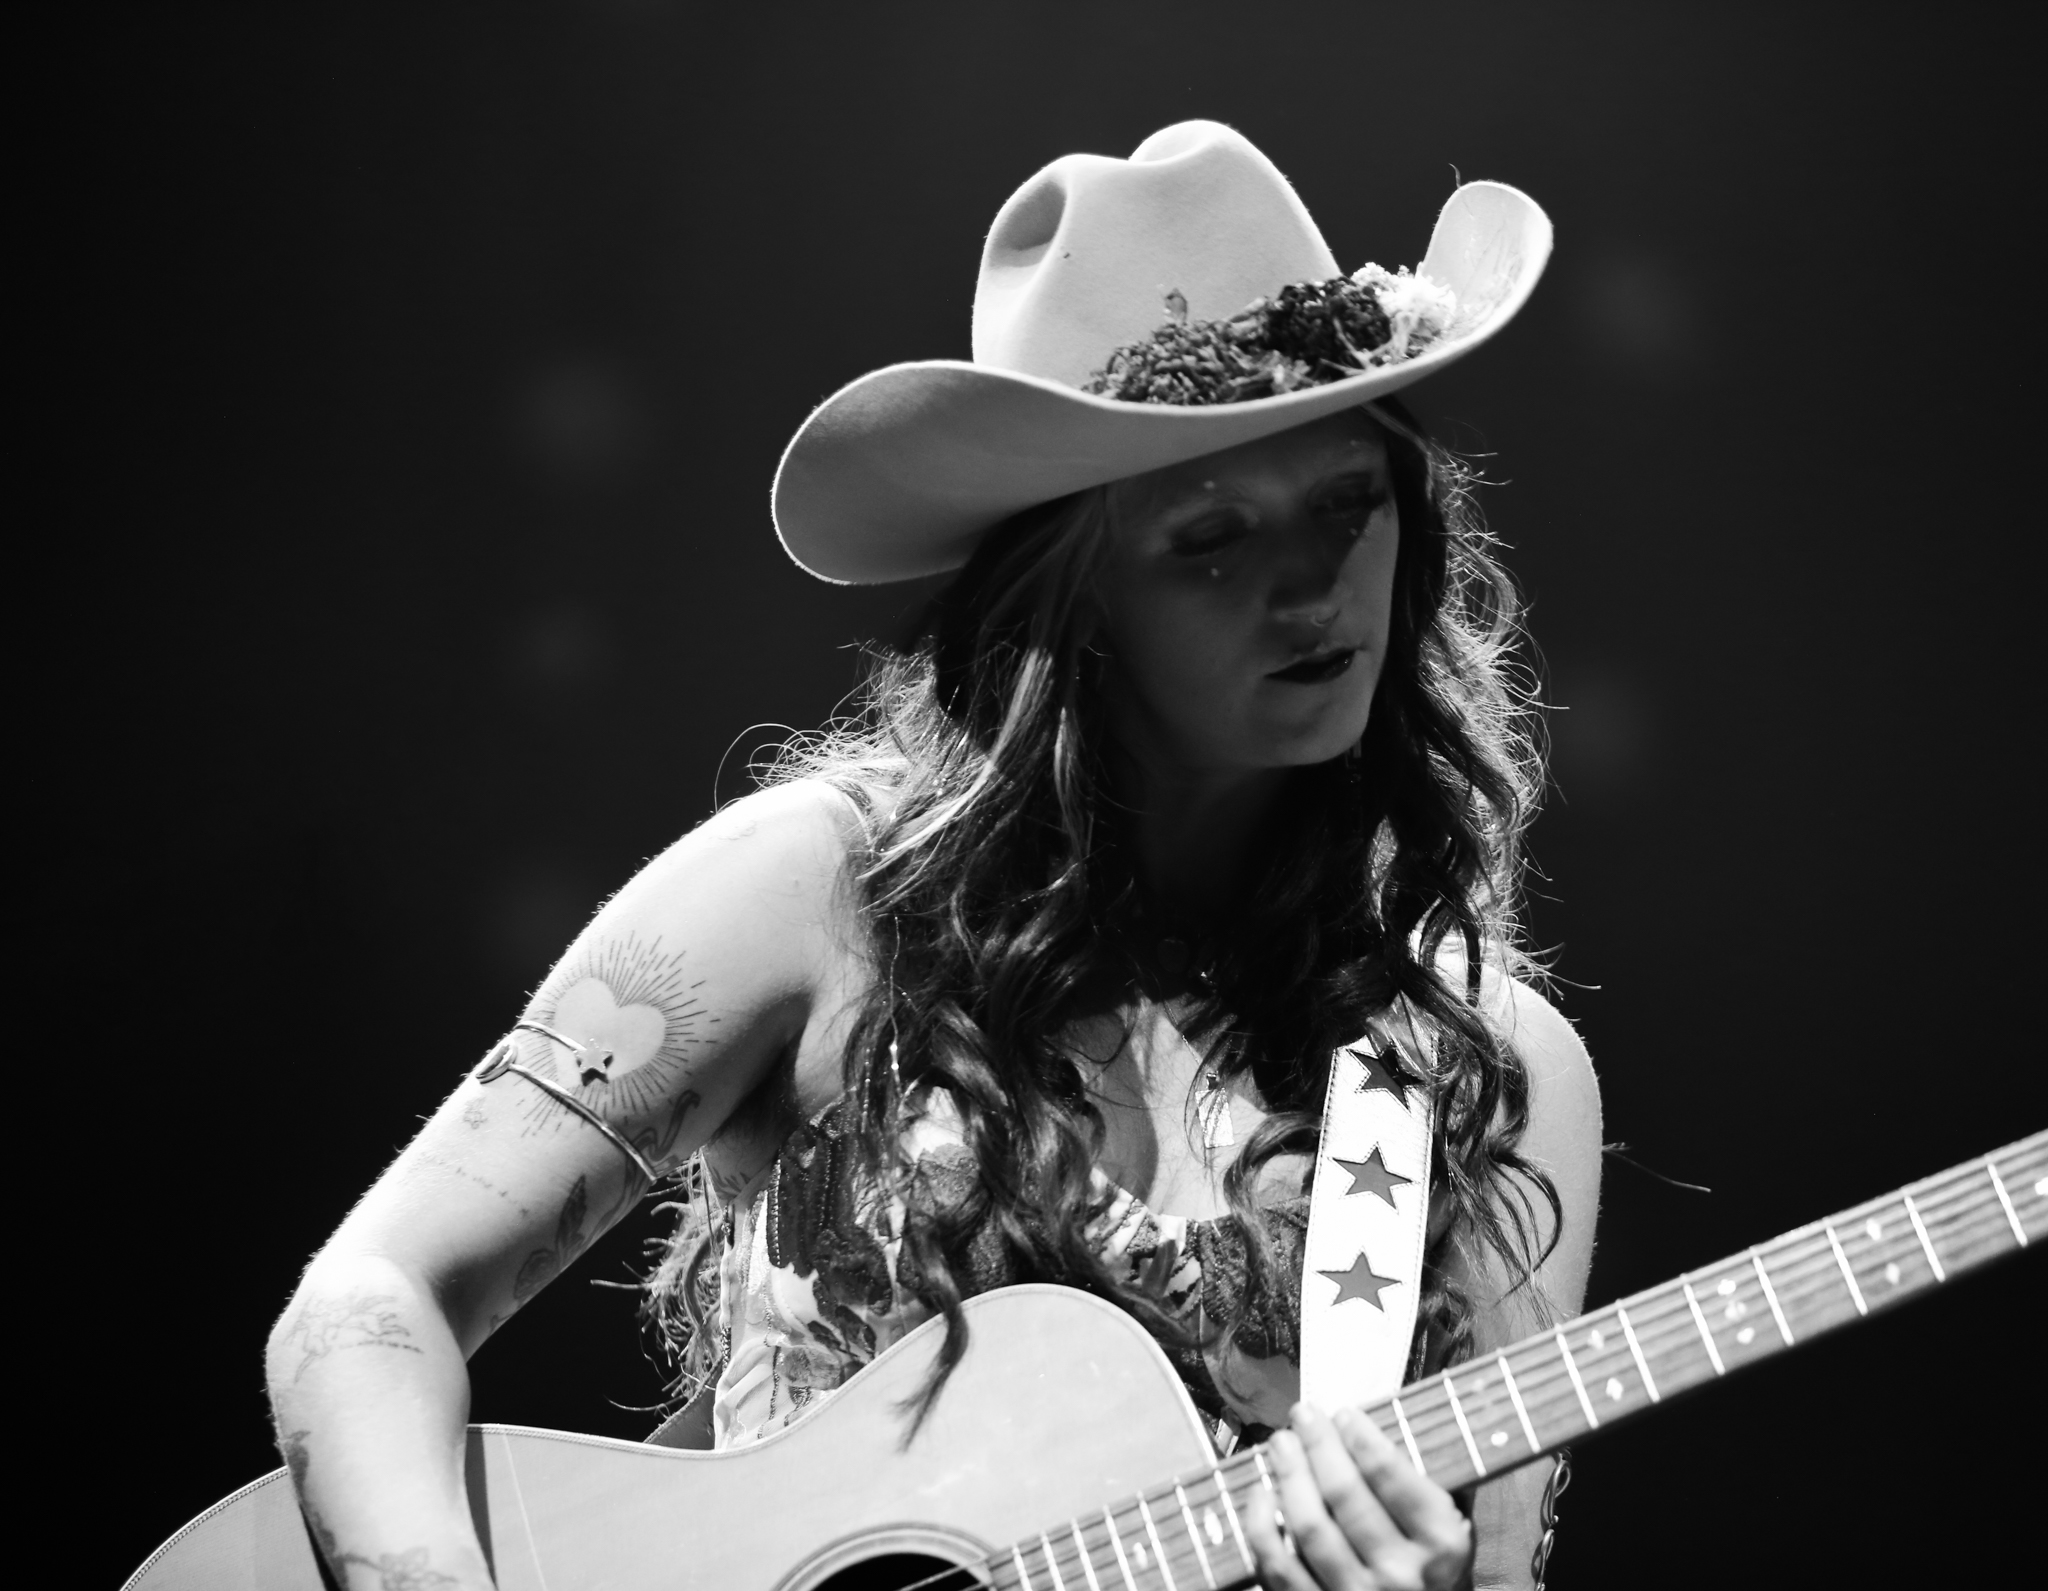 Light Shifter Studios captures country musician Sierra Ferrell at a music venue in Asheville, North Carolina.  